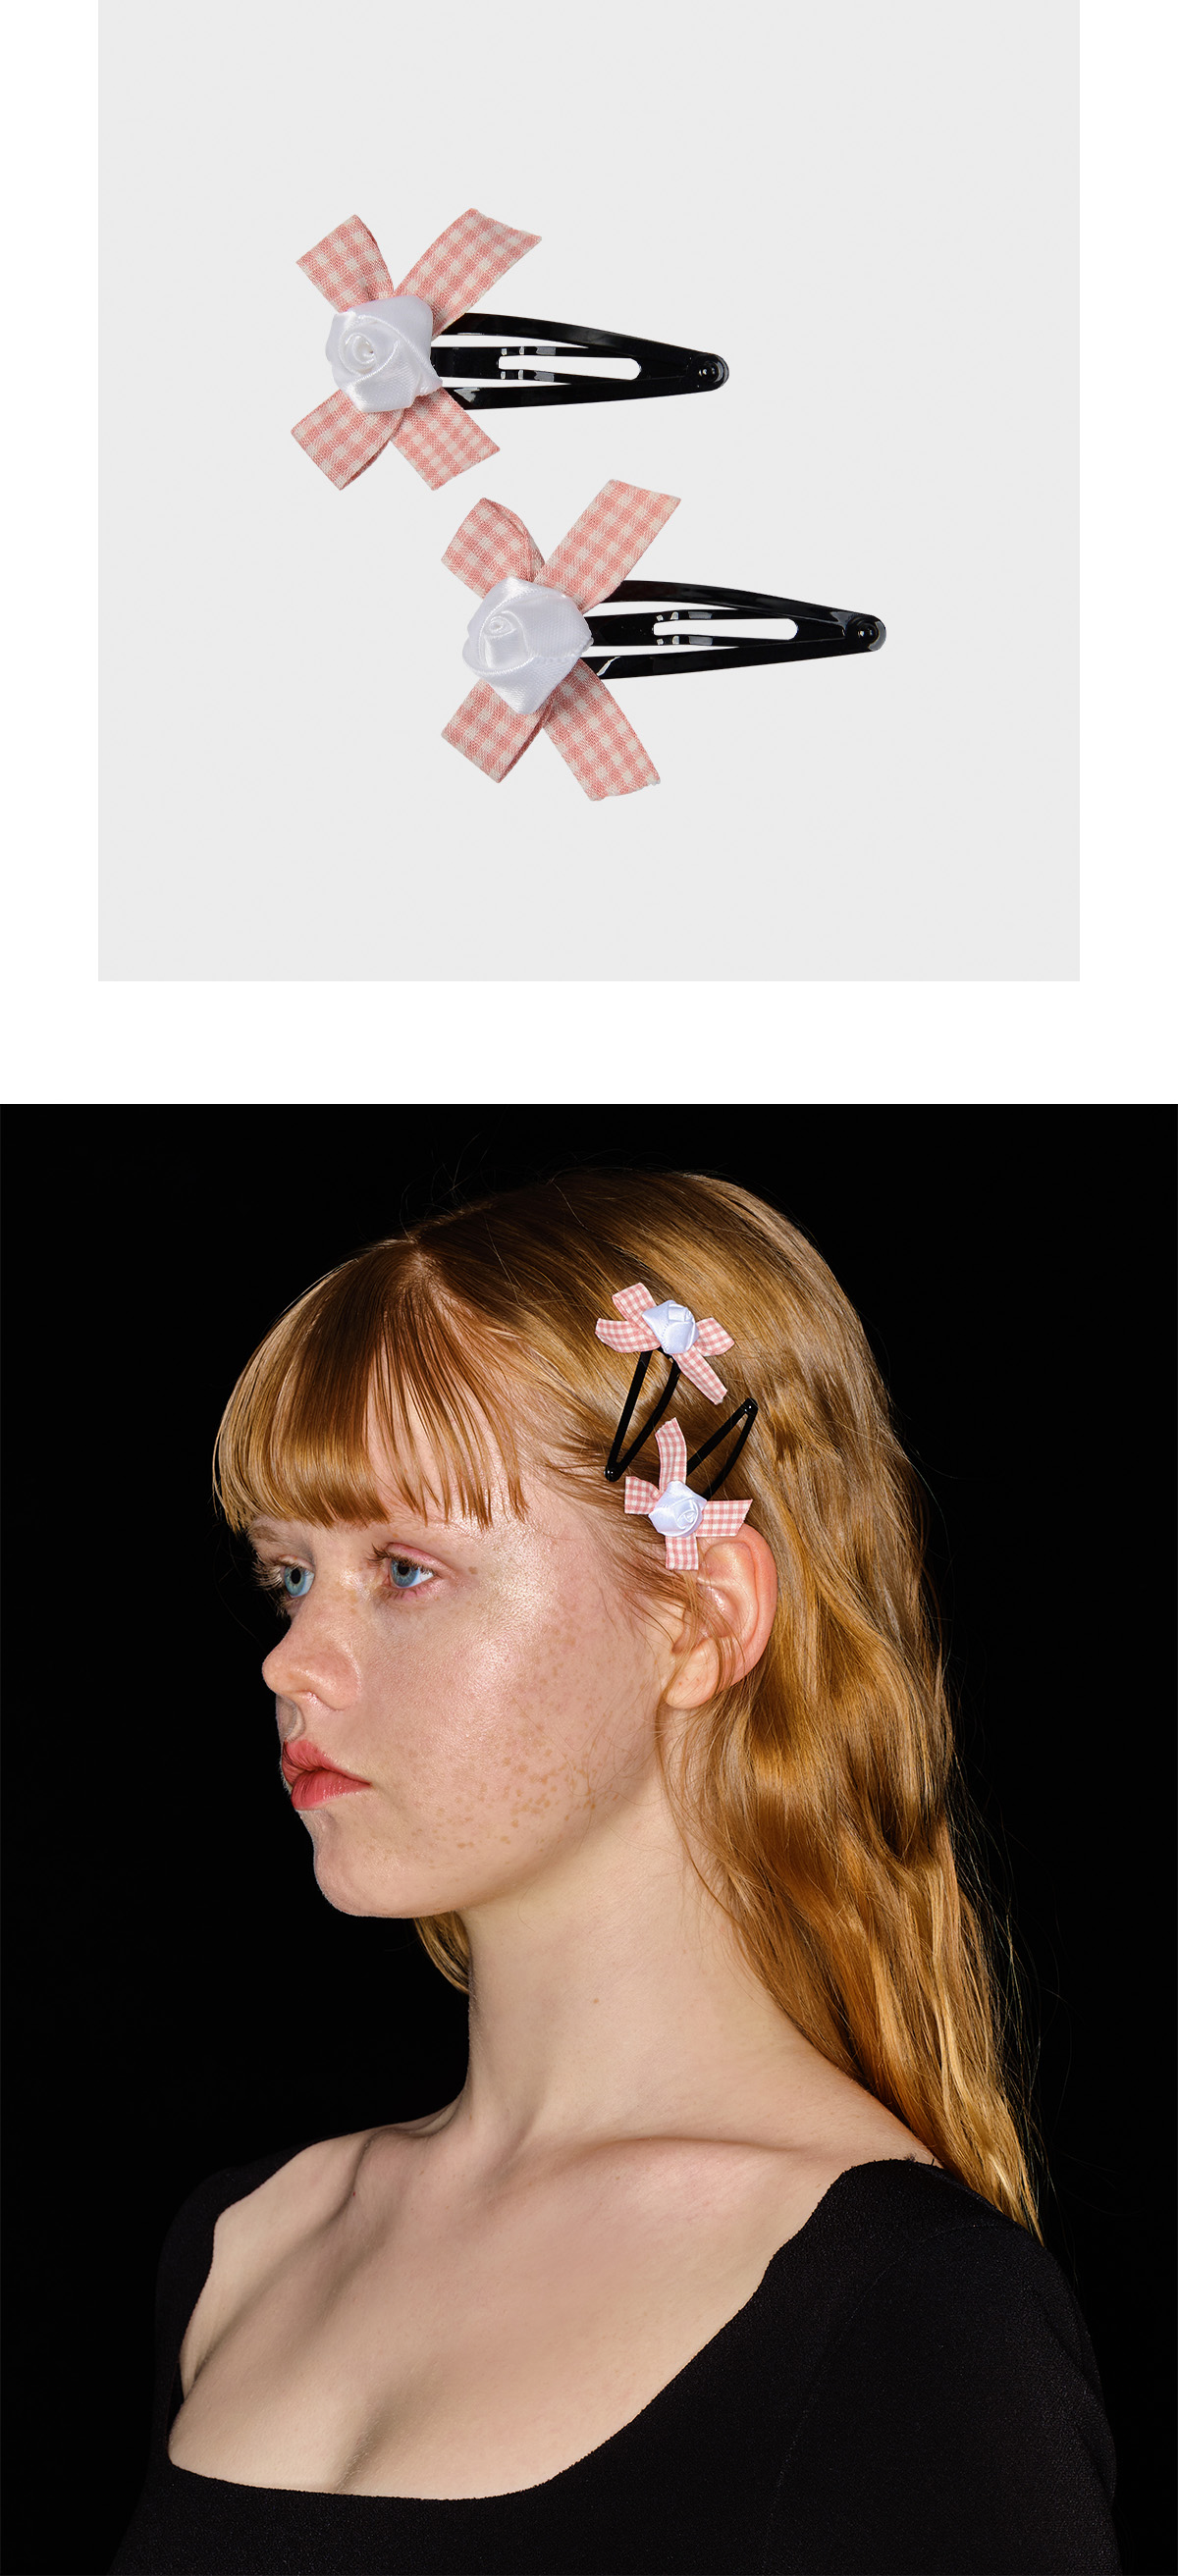 CHECK BOW & ROSE HAIR CLIP SET (BABY PINK&WHITE)